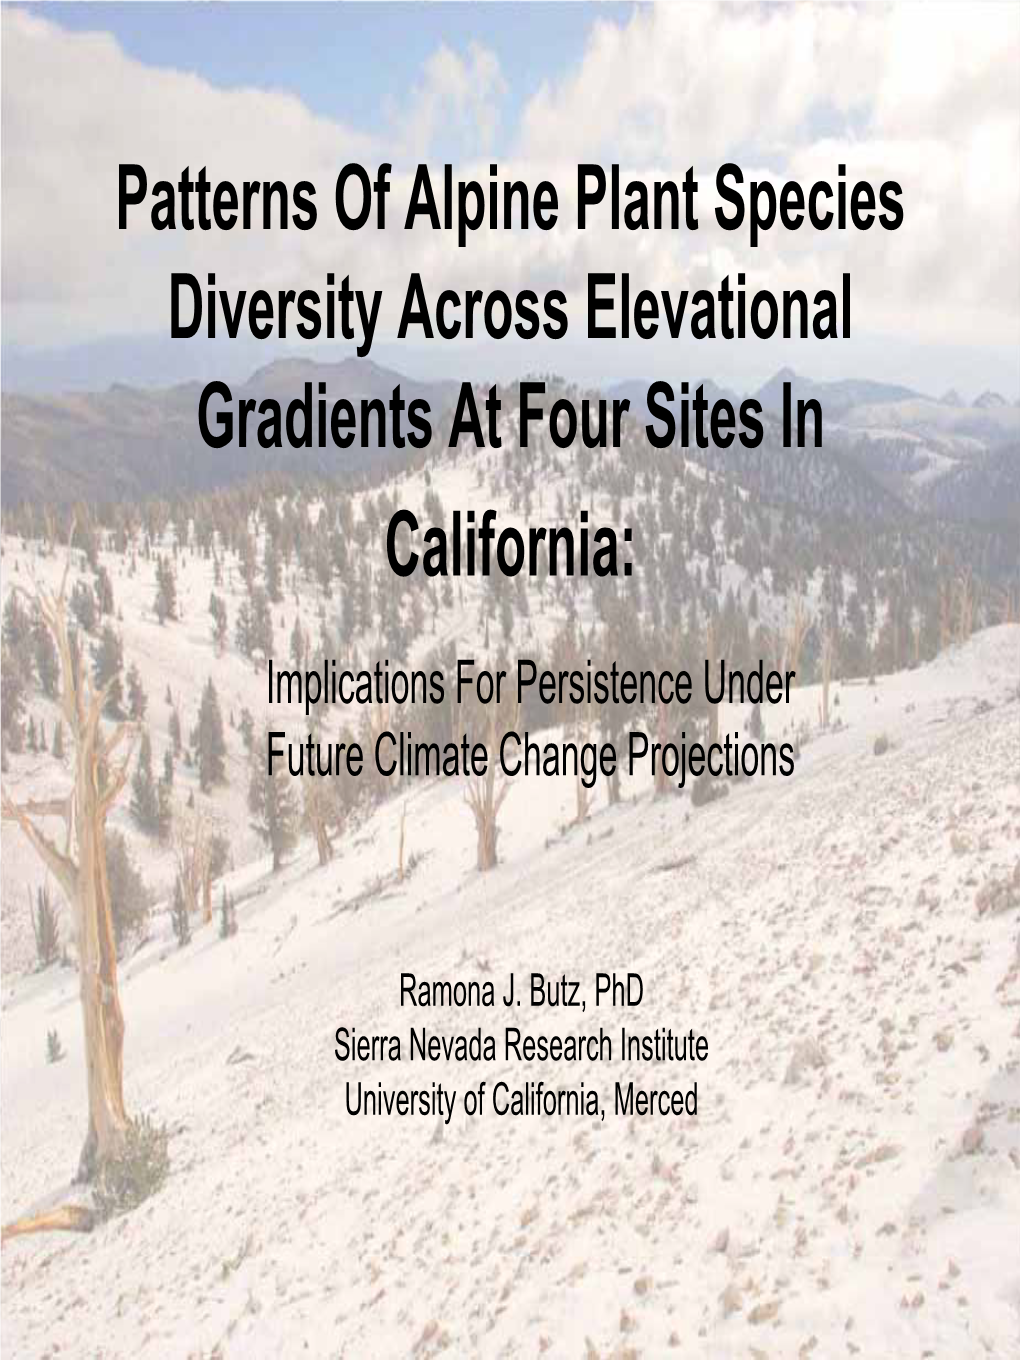 Patterns of Alpine Plant Species Diversity Across Elevational Gradients at Four Sites in California